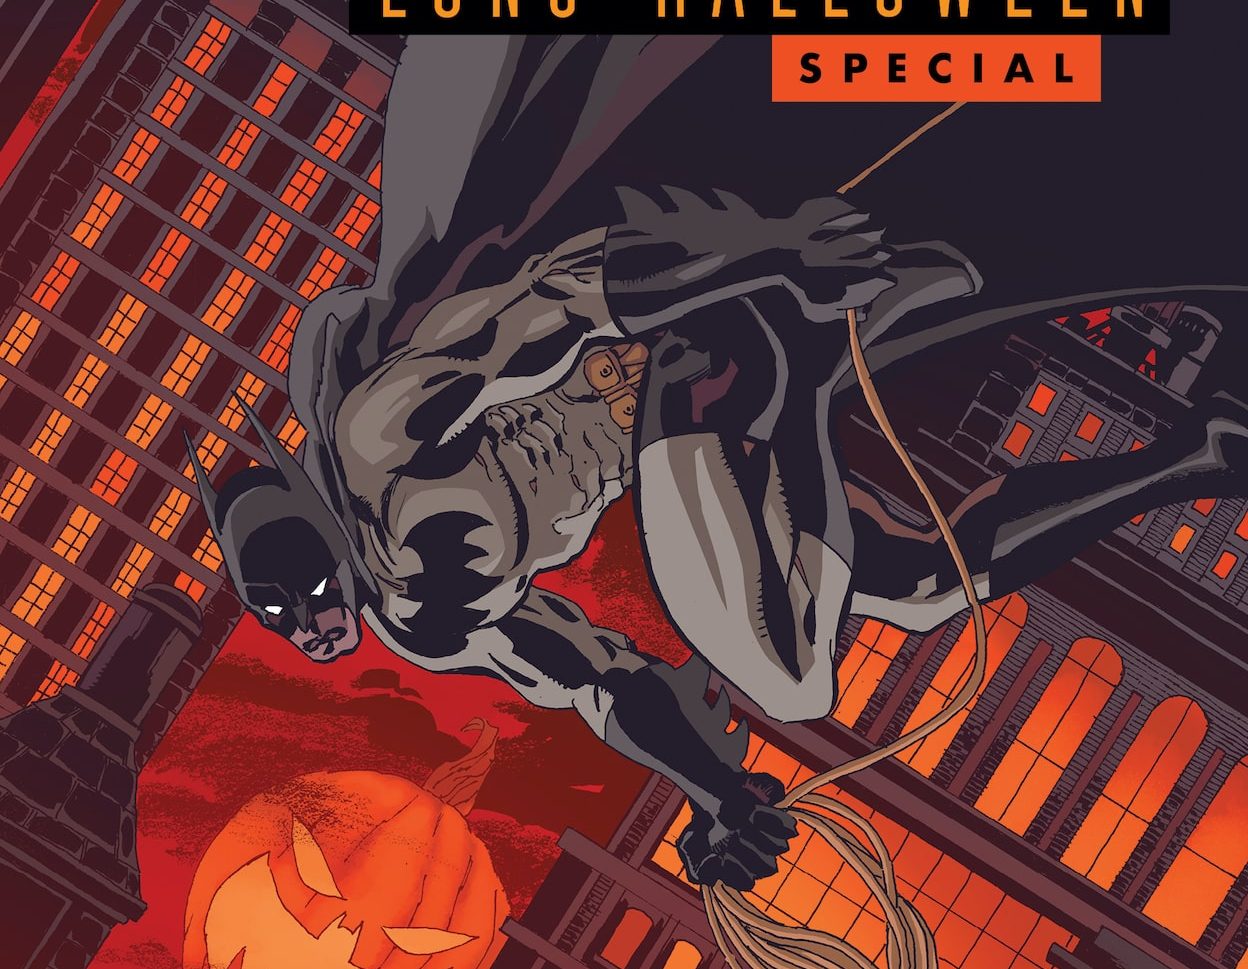 'Batman: The Long Halloween Special' is a triumphant return to an iconic tale